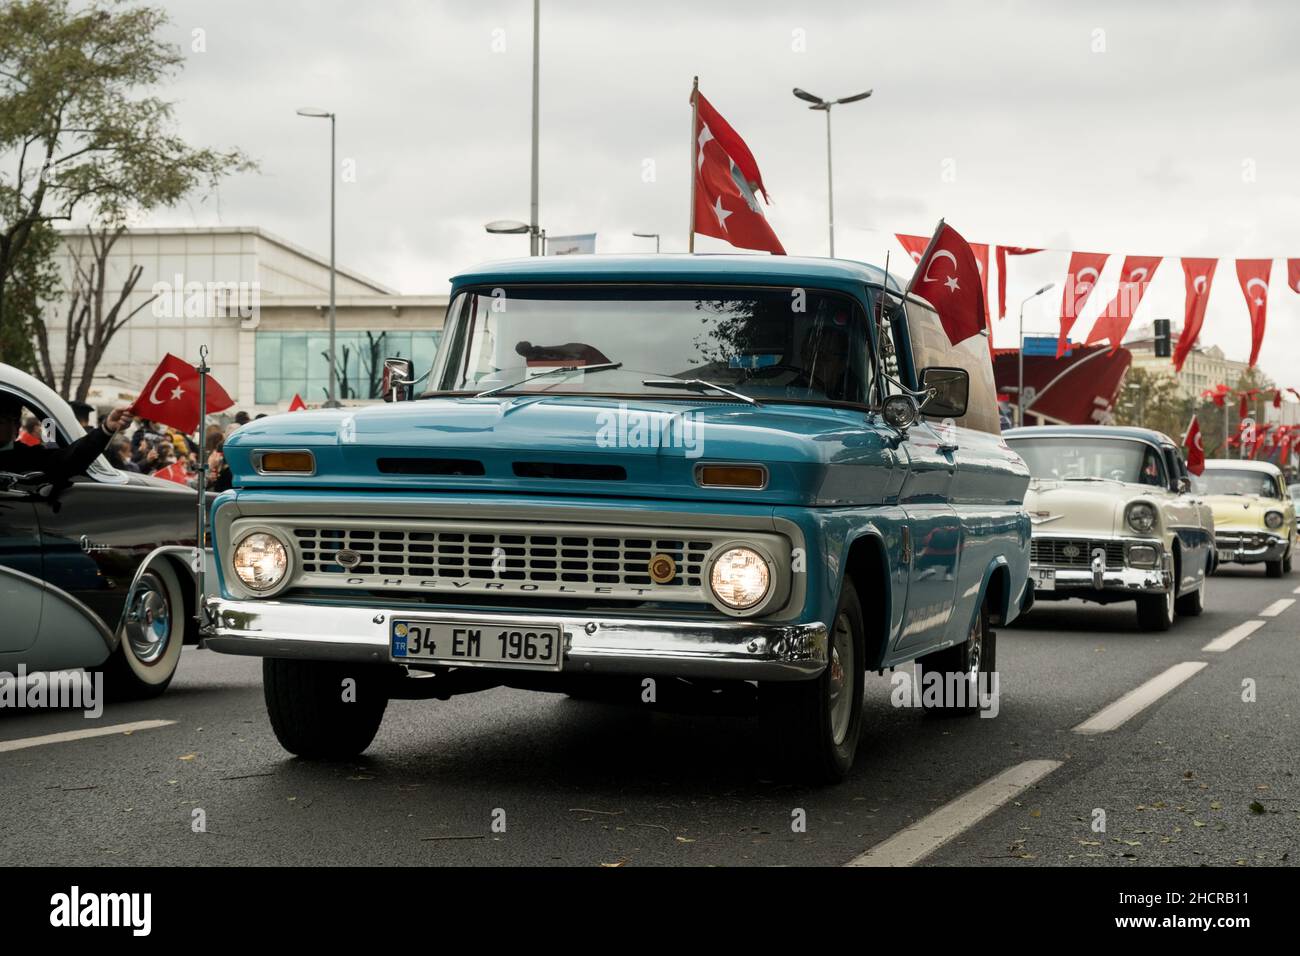 Istanbul, Turkey - October 29, 2021: Chevrolet old pick-up truck in celebrations of october 29 republic day of Turkey. Stock Photo